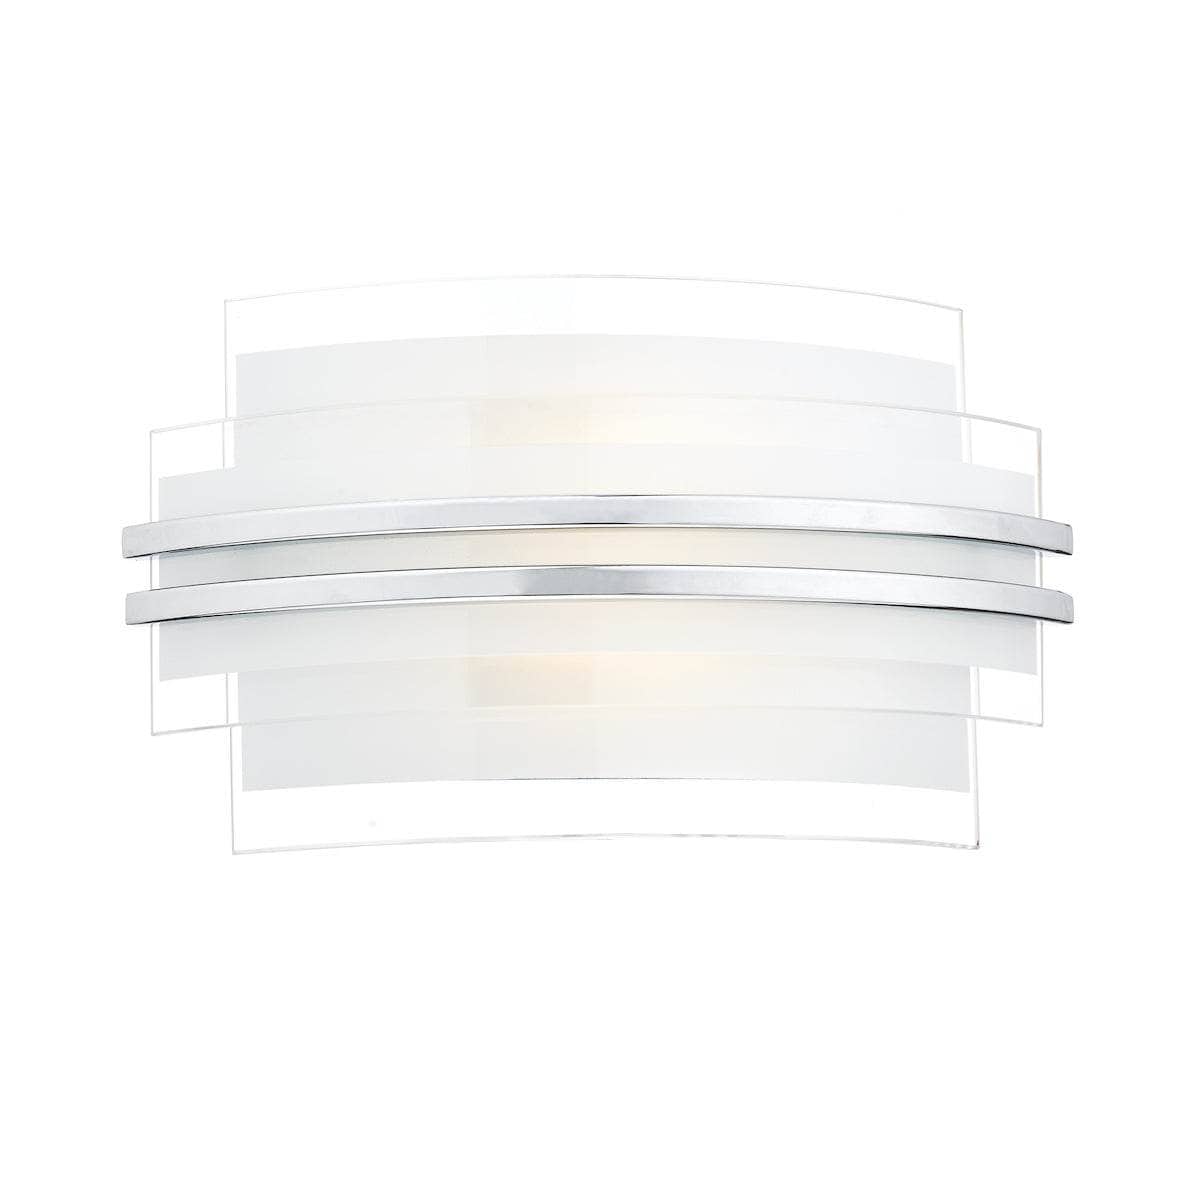 Lights  -  Tas Sec072 Small Sector Double Trim Led Wall Bracket  -  50123710